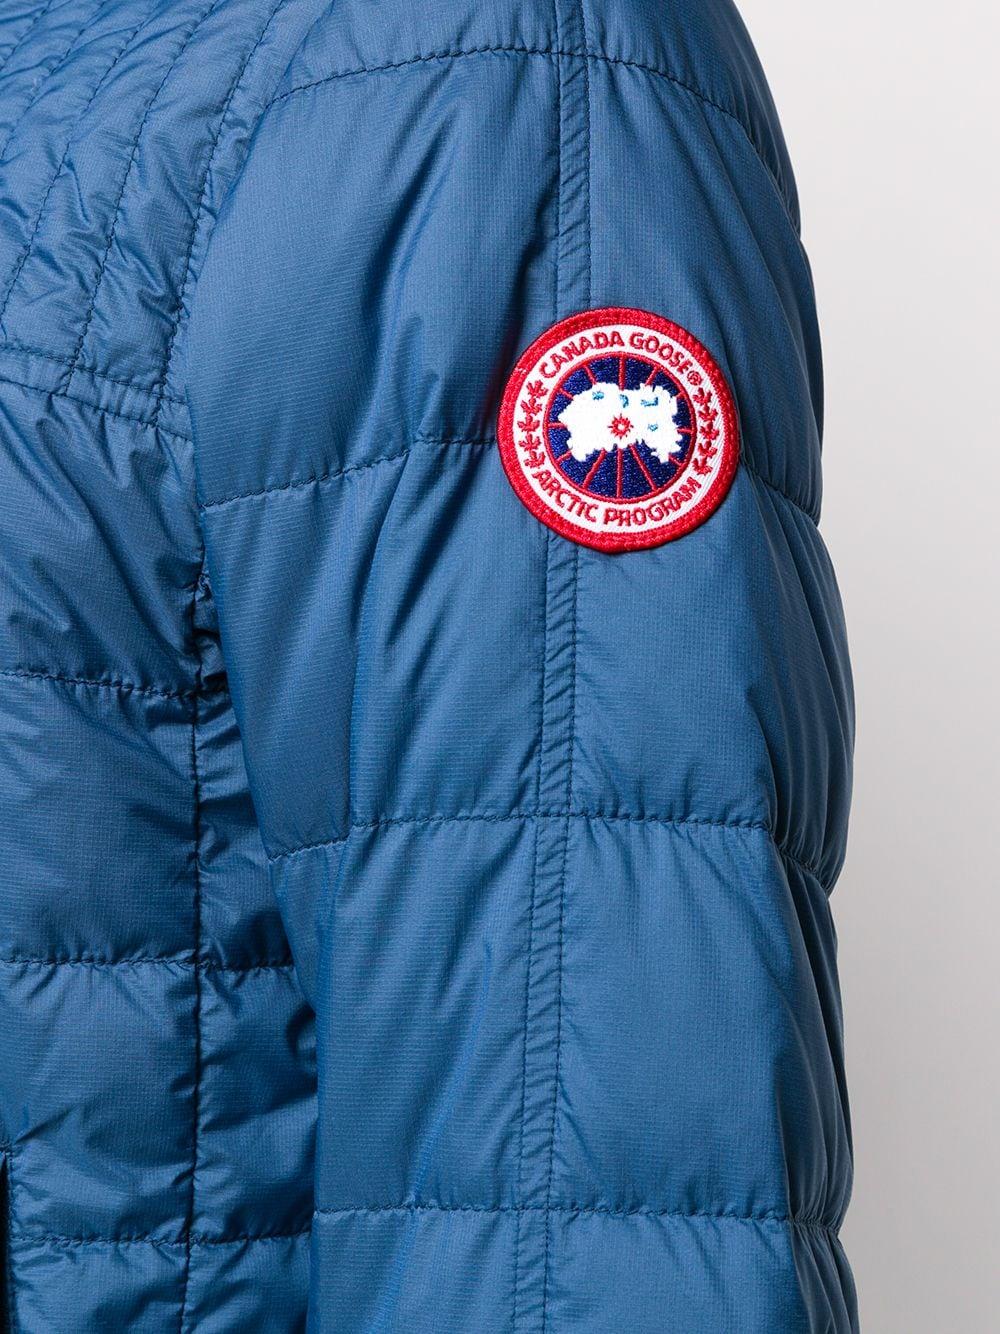 Canada Goose Goose Dunham Quilted Ripstop Jacket in Blue for Men - Save 39%  | Lyst